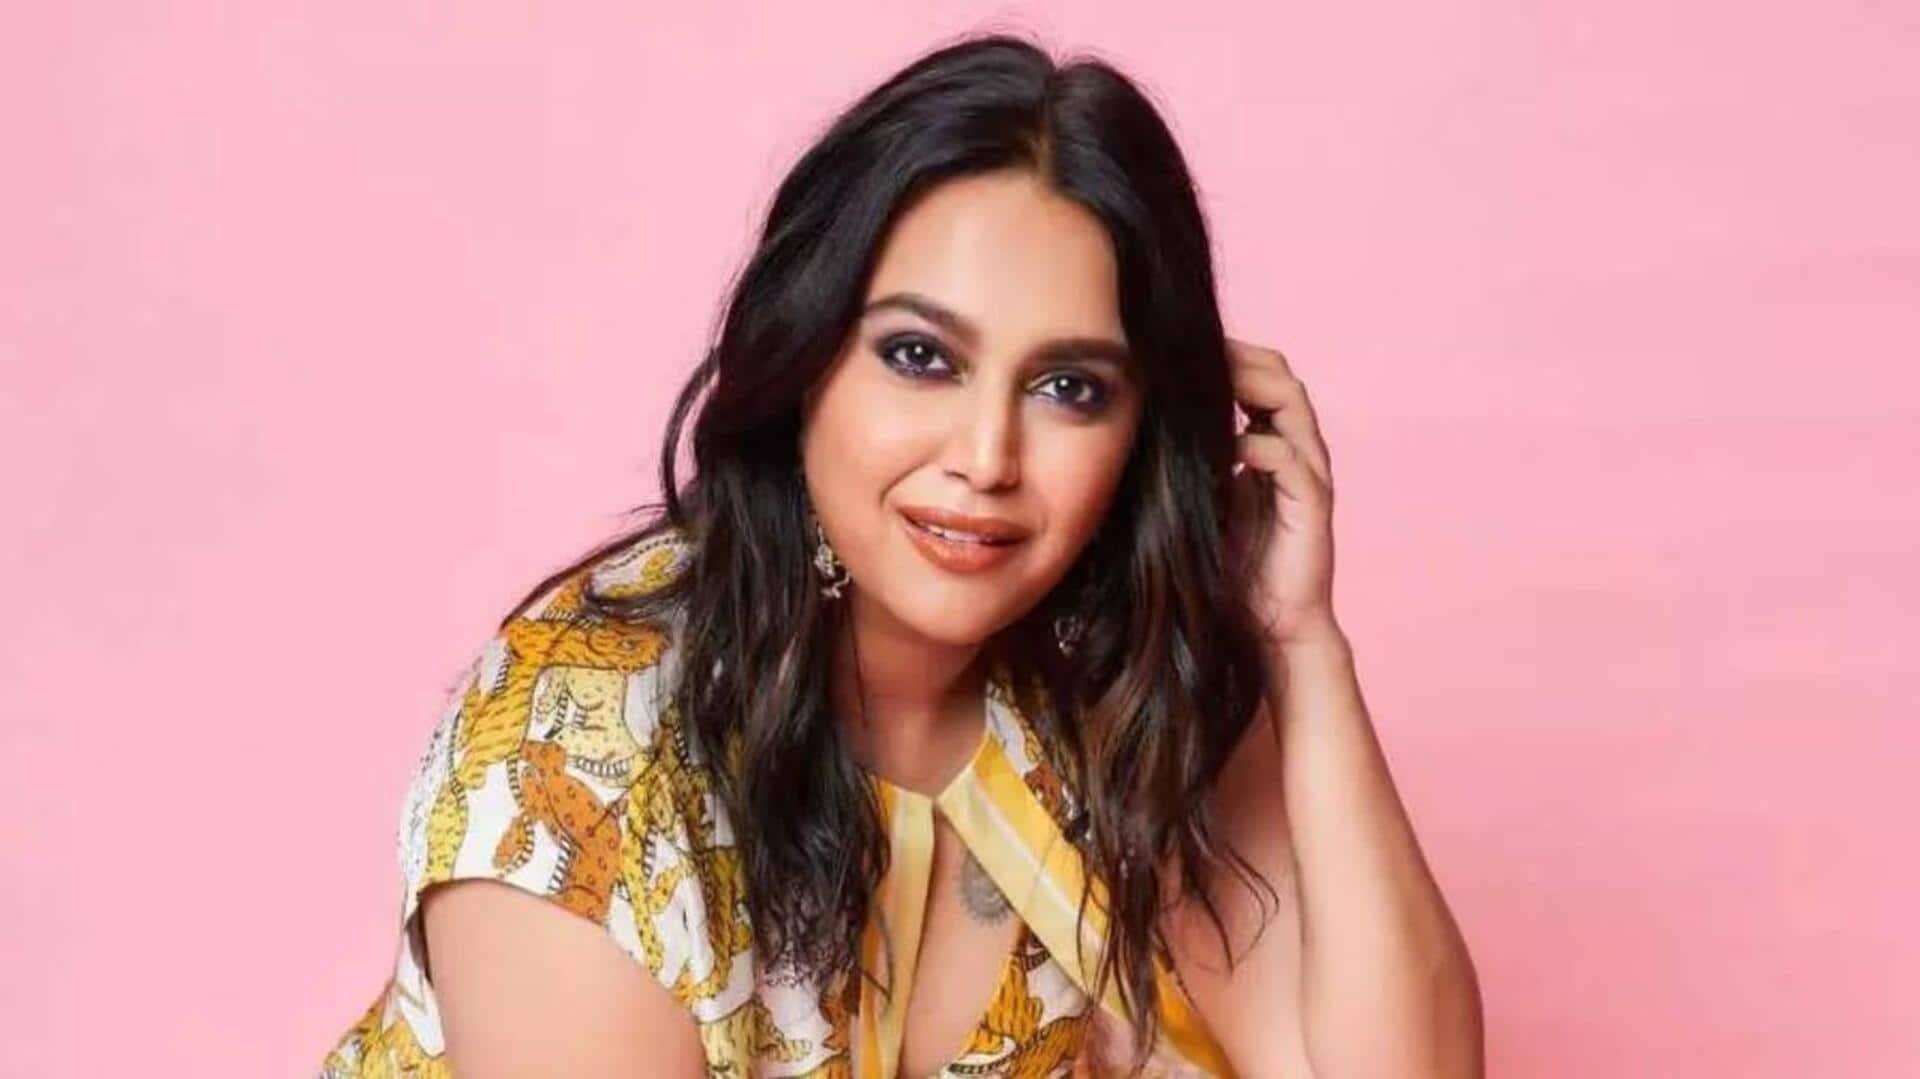 'Gave birth recently': Swara Bhasker criticizes news outlet over weight-shaming